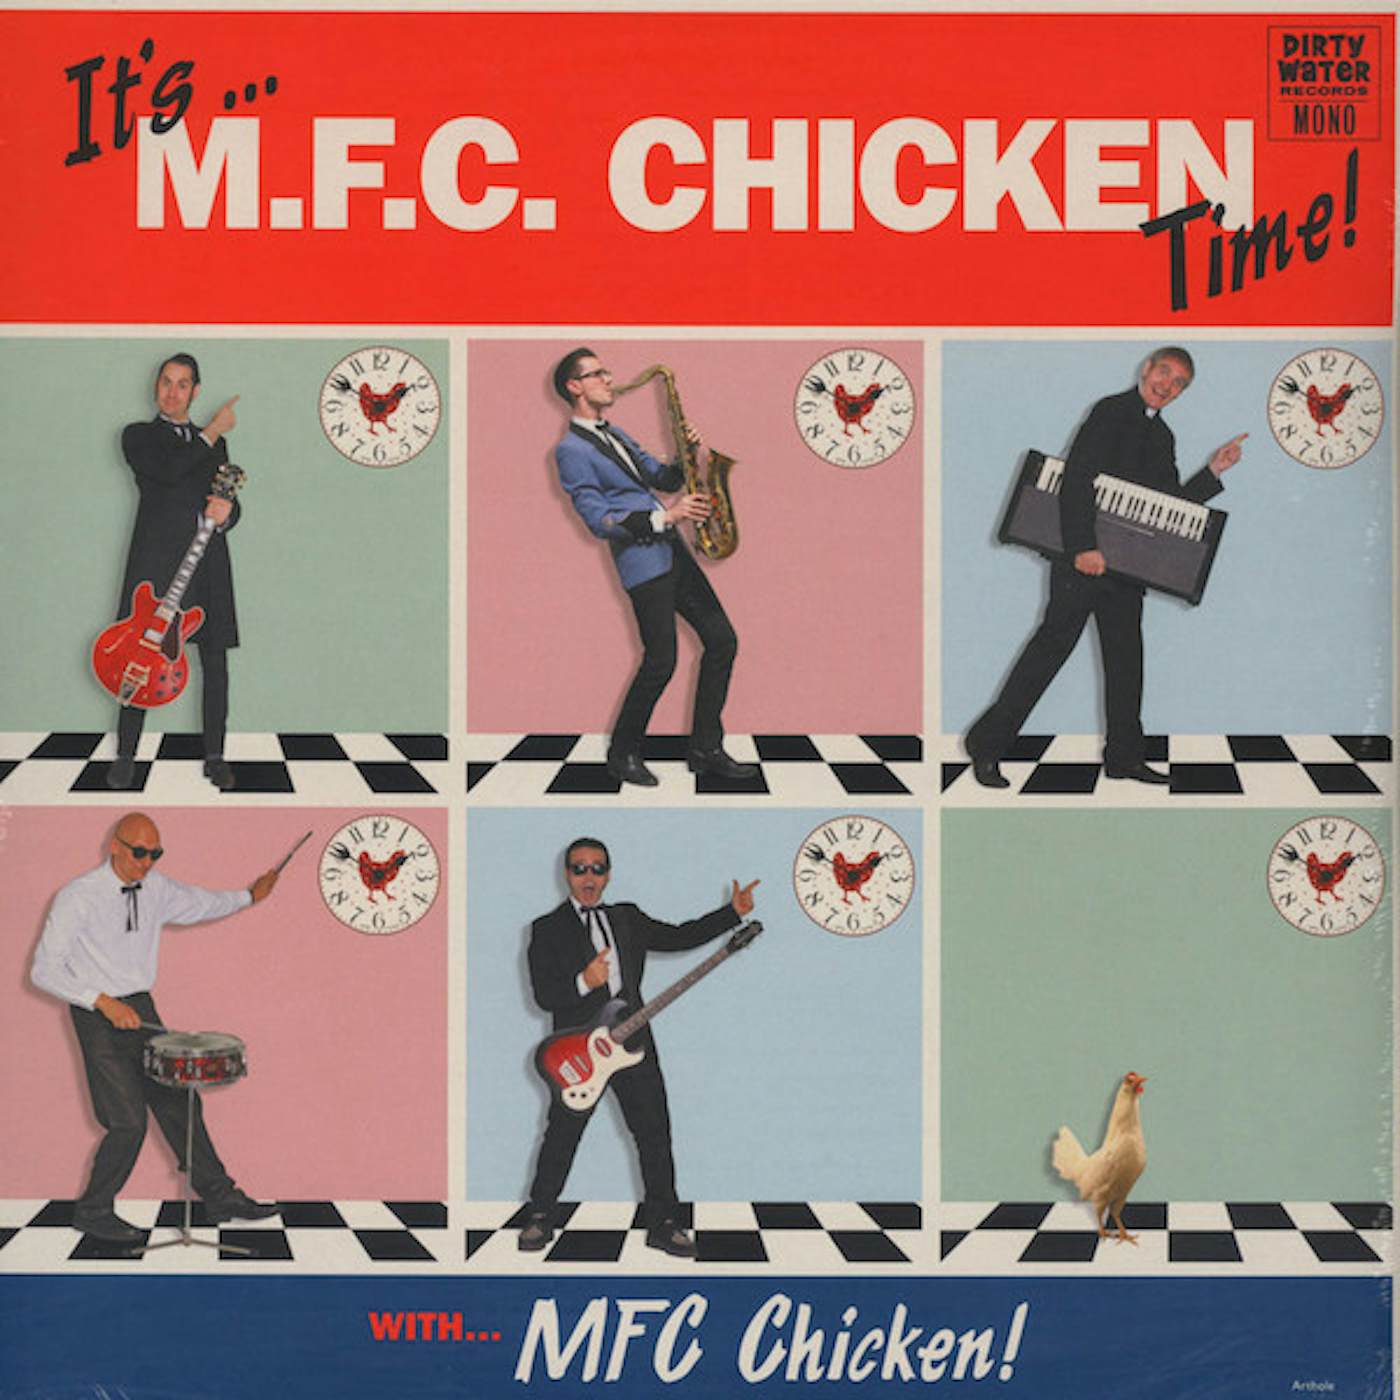 It's Mfc Chicken Time! Vinyl Record